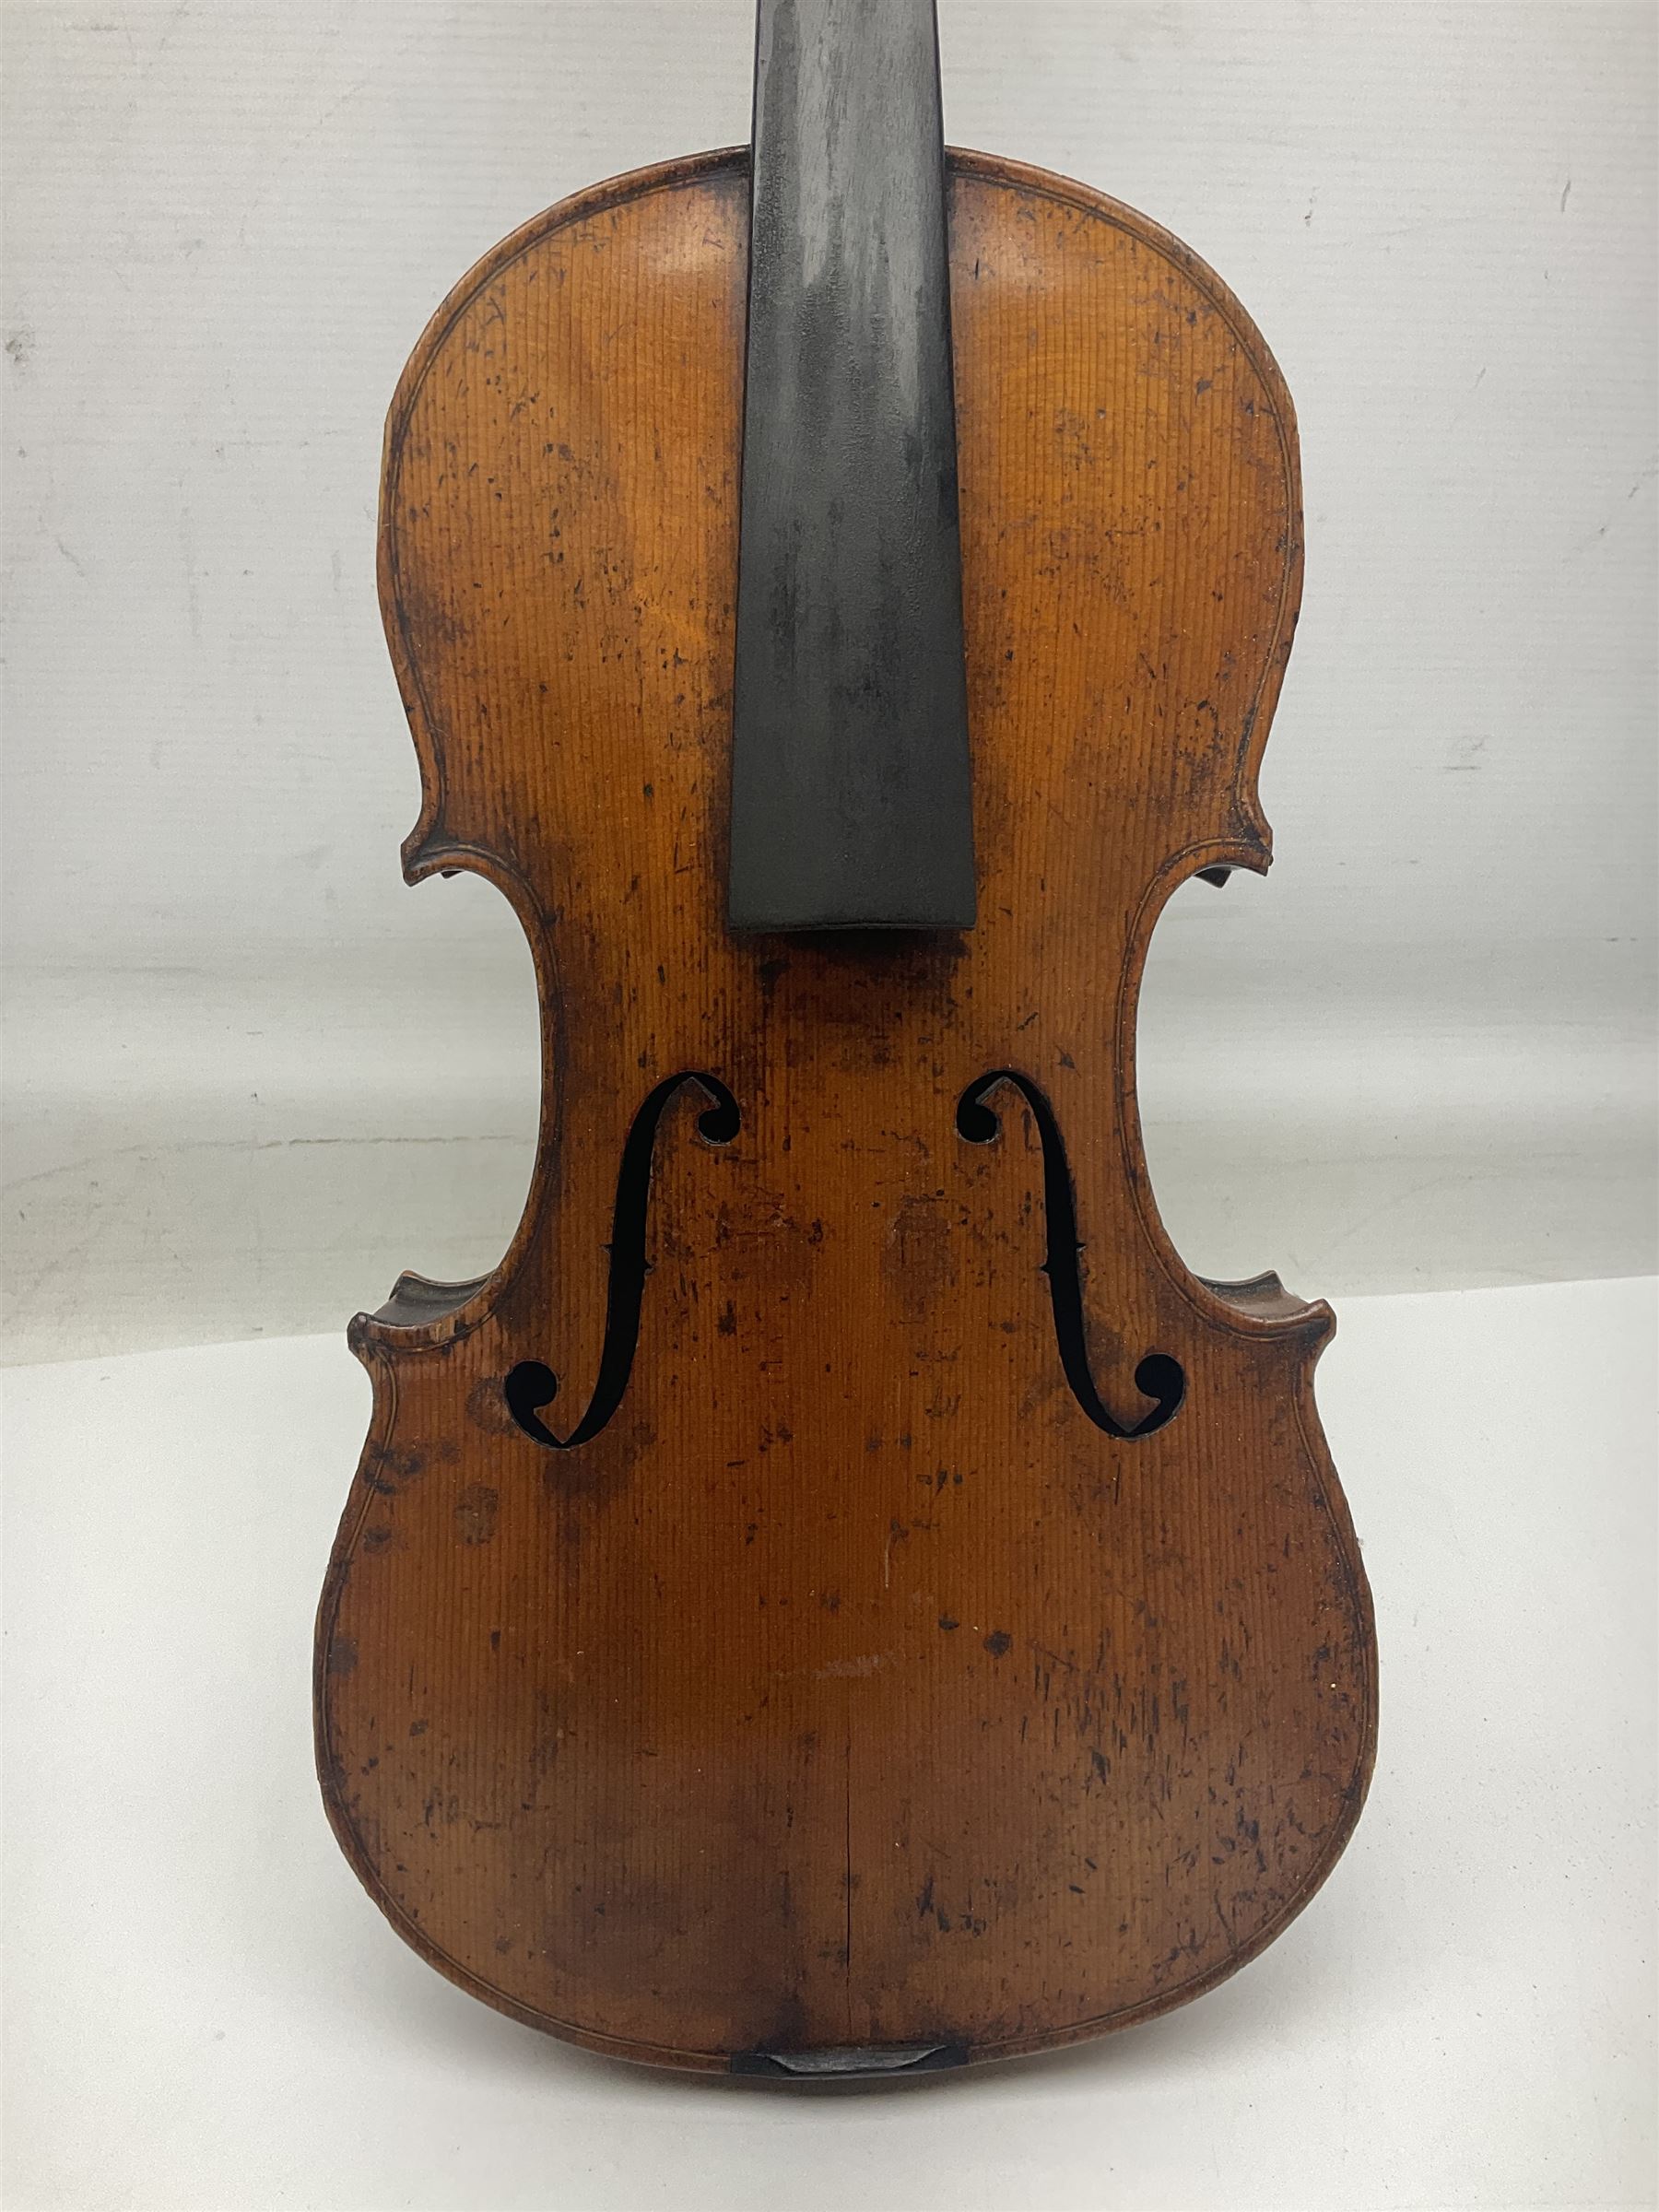 Late 19th century German trade violin c1890 with 36cm two-piece birds-eye maple back - Image 5 of 17